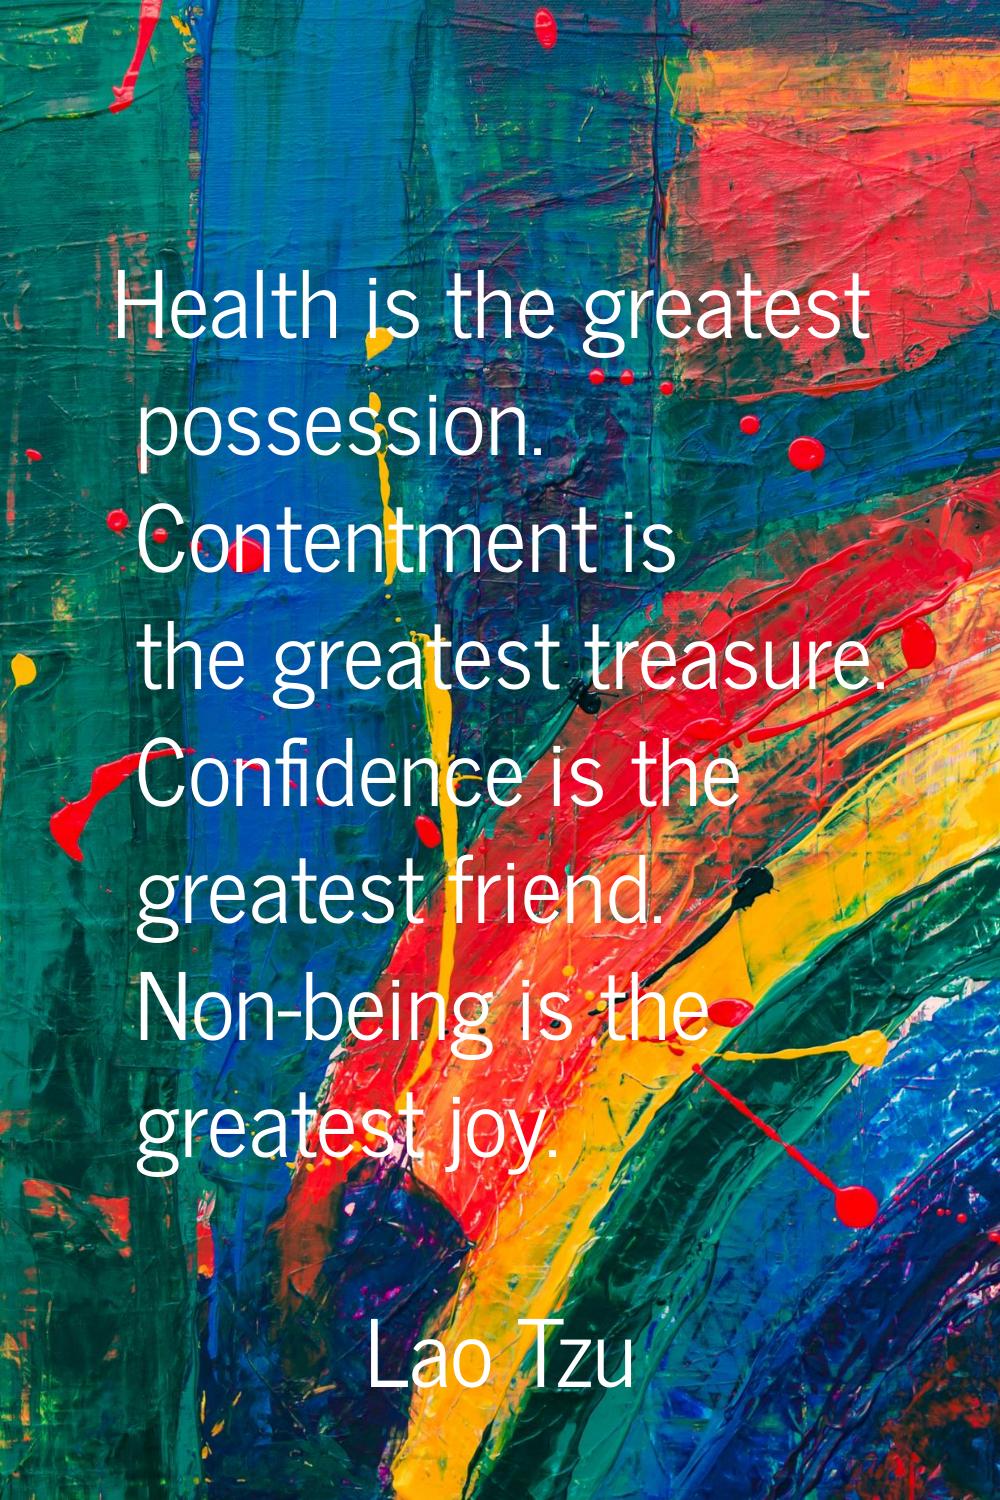 Health is the greatest possession. Contentment is the greatest treasure. Confidence is the greatest